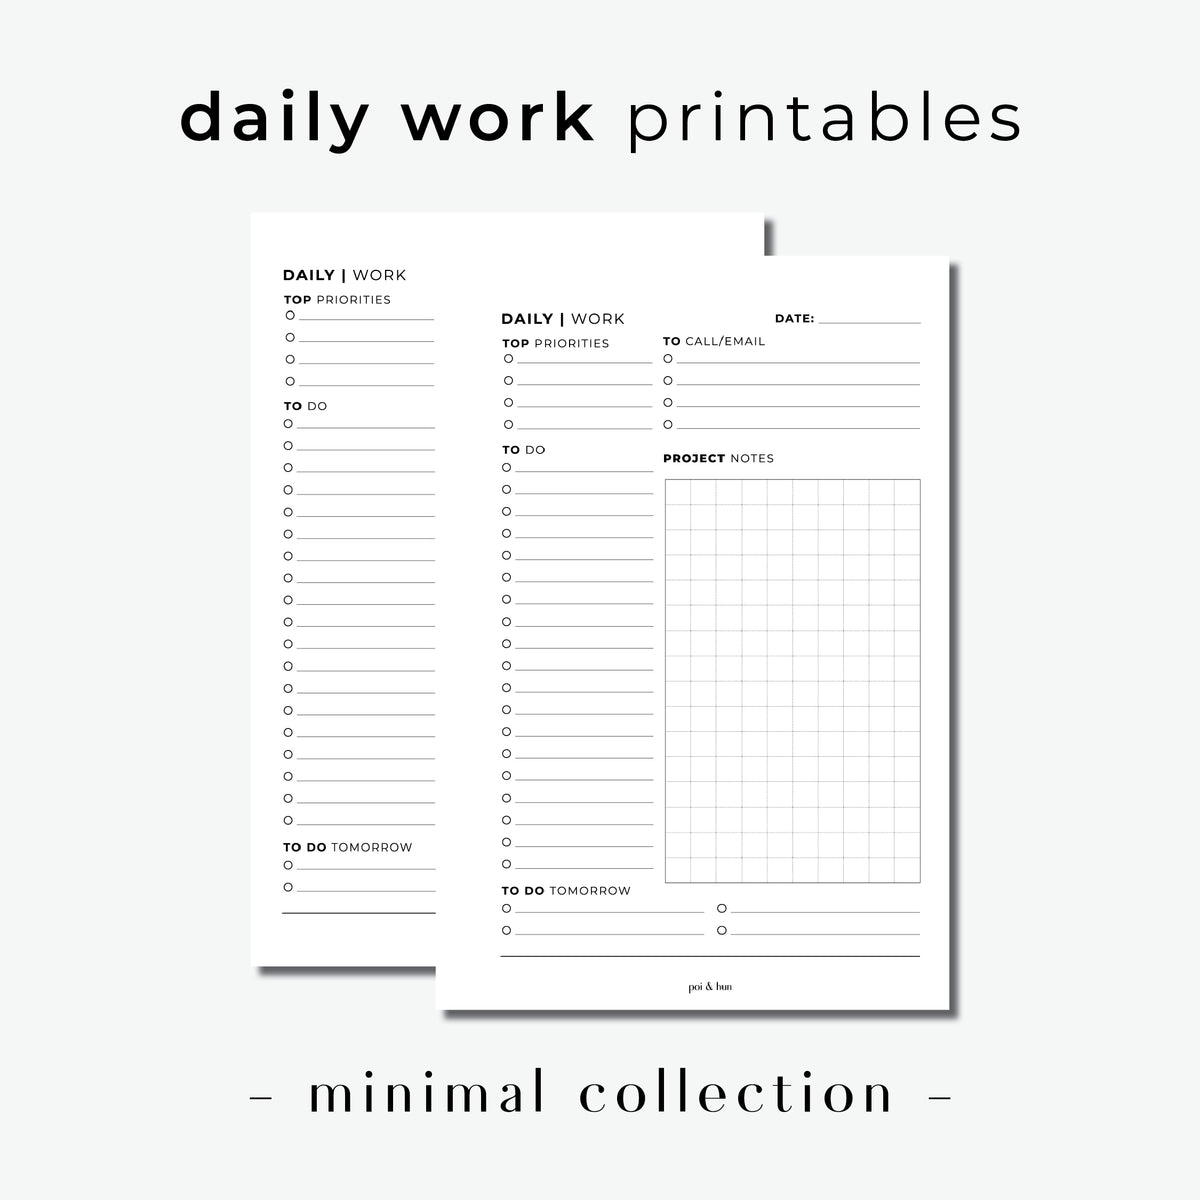 Minimal Productivity Daily Planner Inserts